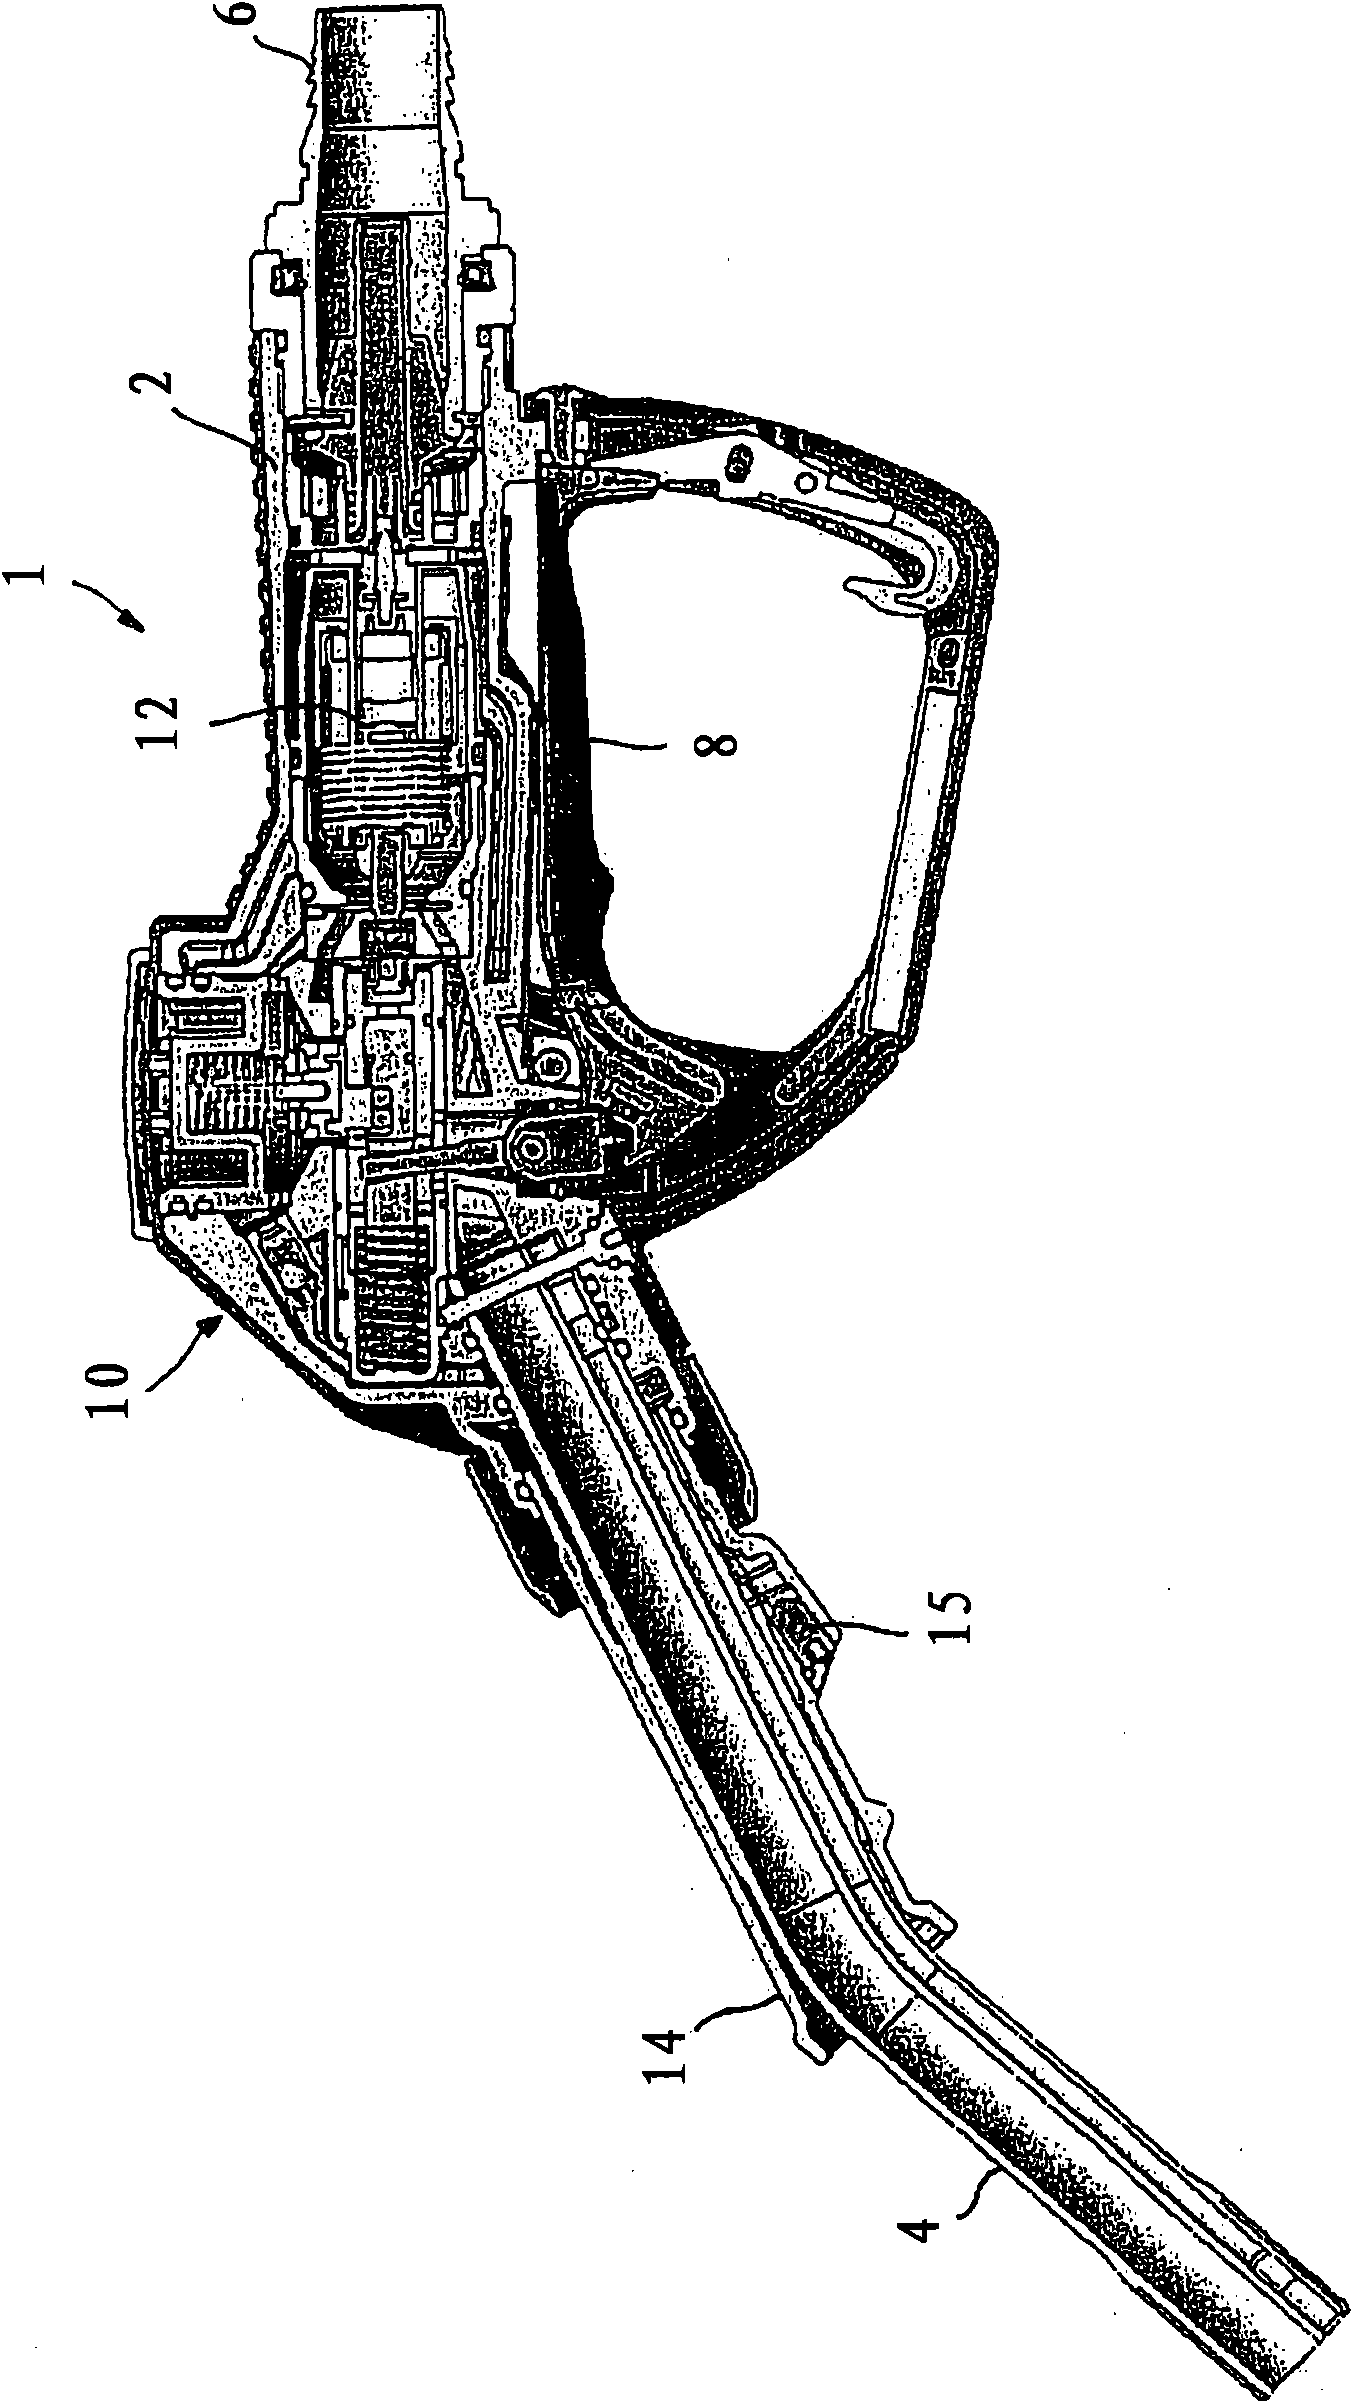 Fuel nozzle with device for extracting fuel steams